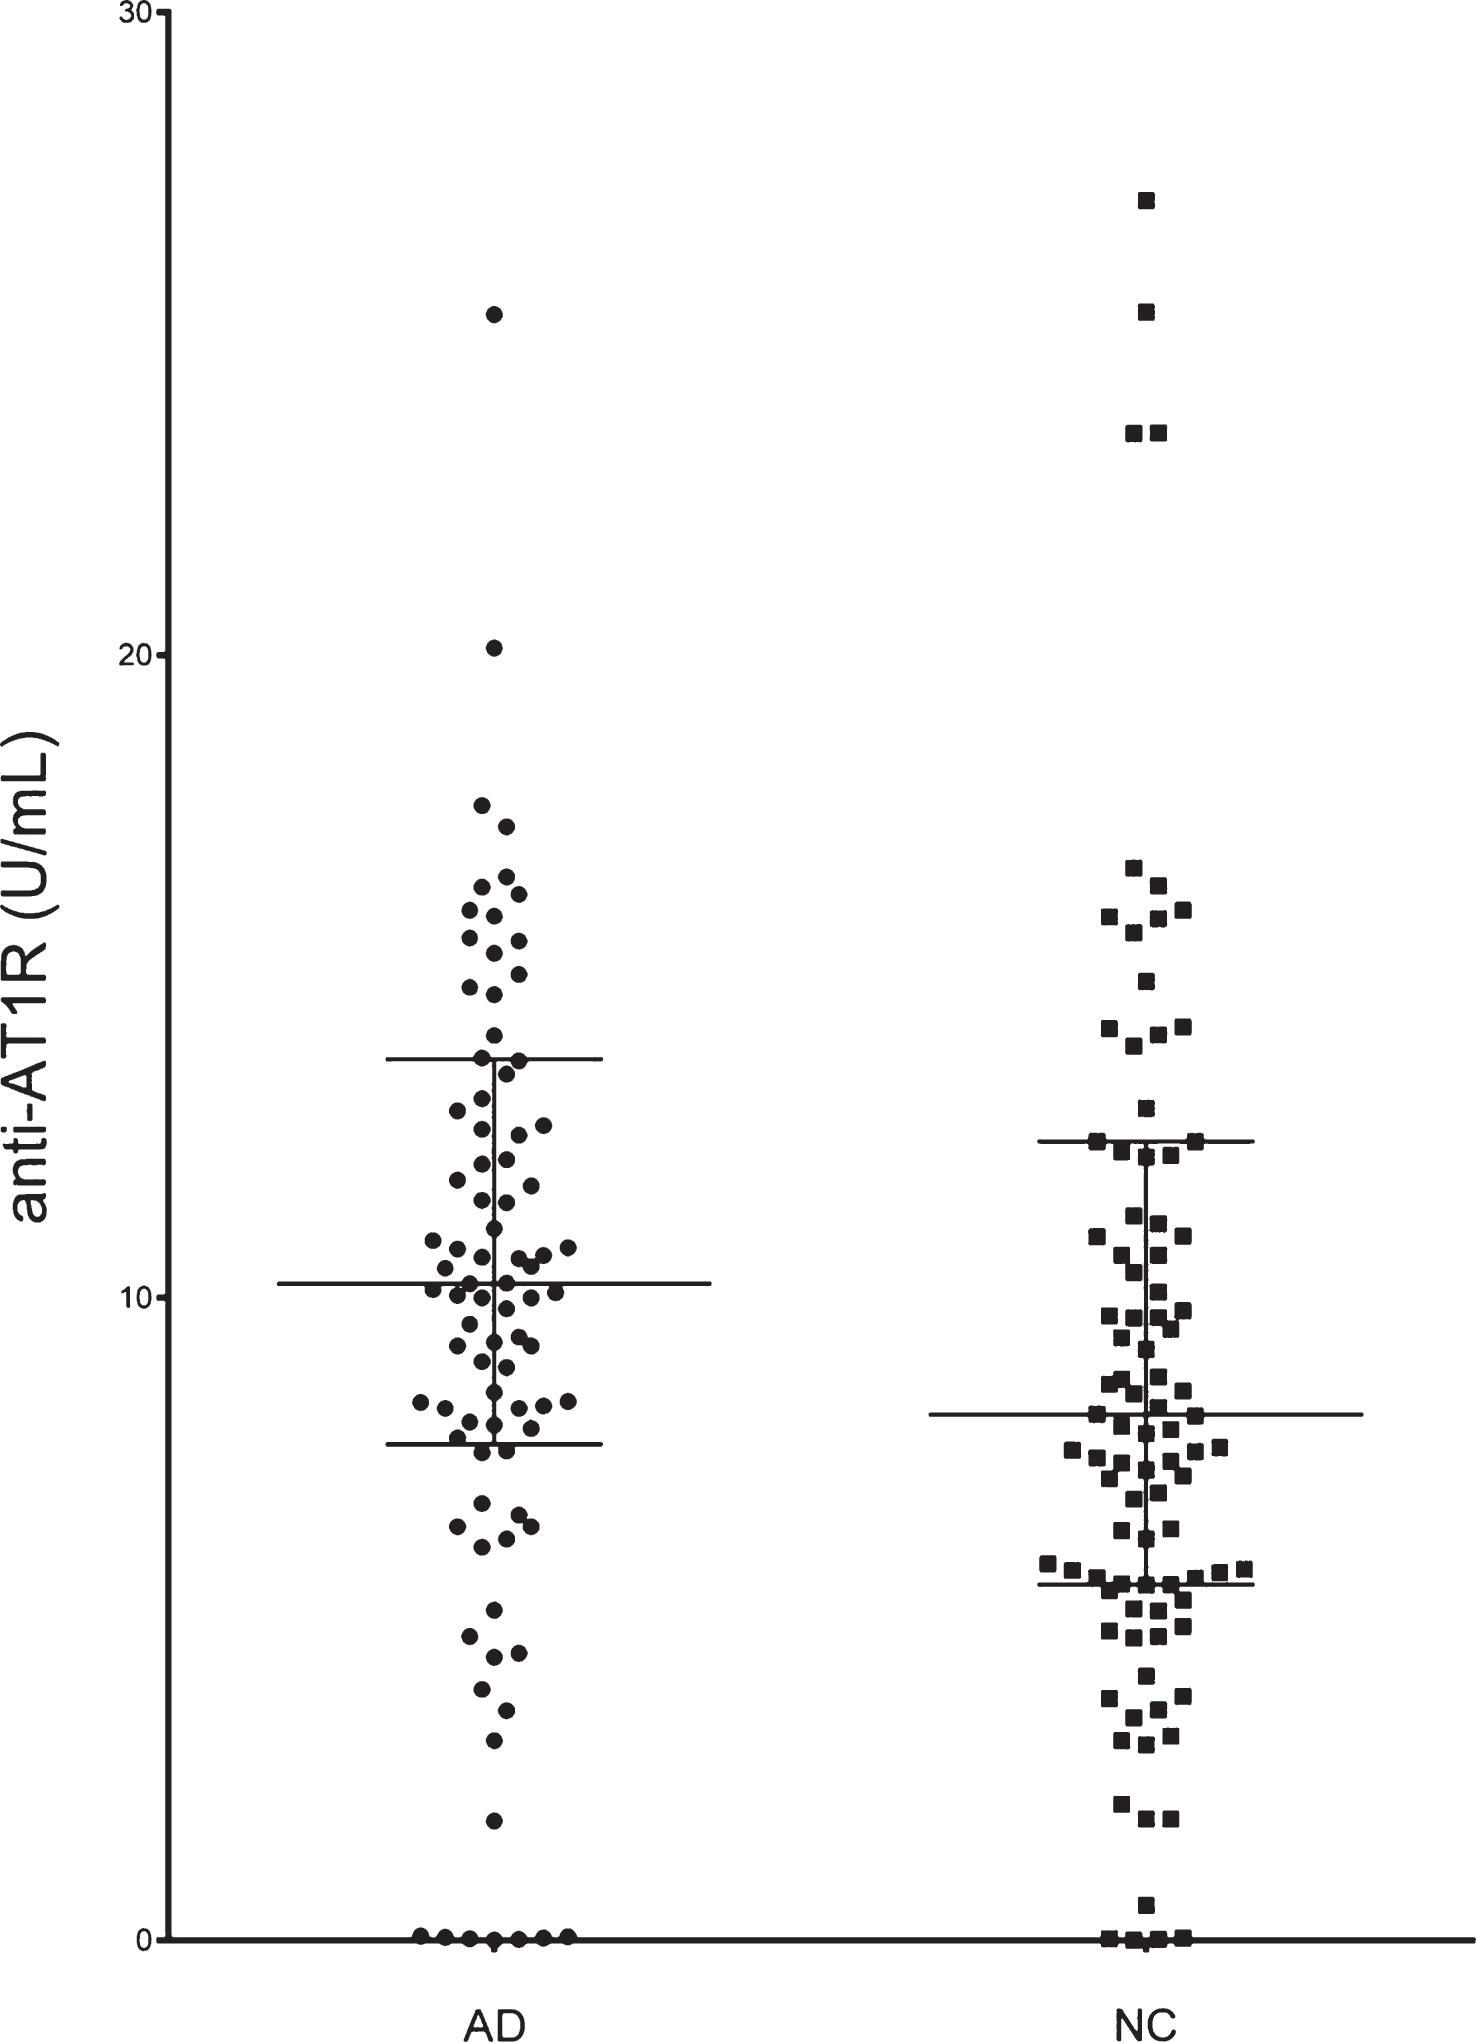 Alzheimer’s disease (AD) patients have significantly higher levels of circulating serum anti-AT1R compared with normal controls (NC). (Lines indicate median and IQR, 14 outliers with anti-AT1R >30 U/mL have been omitted from graph. There were 6 from the AD group and 8 from controls).